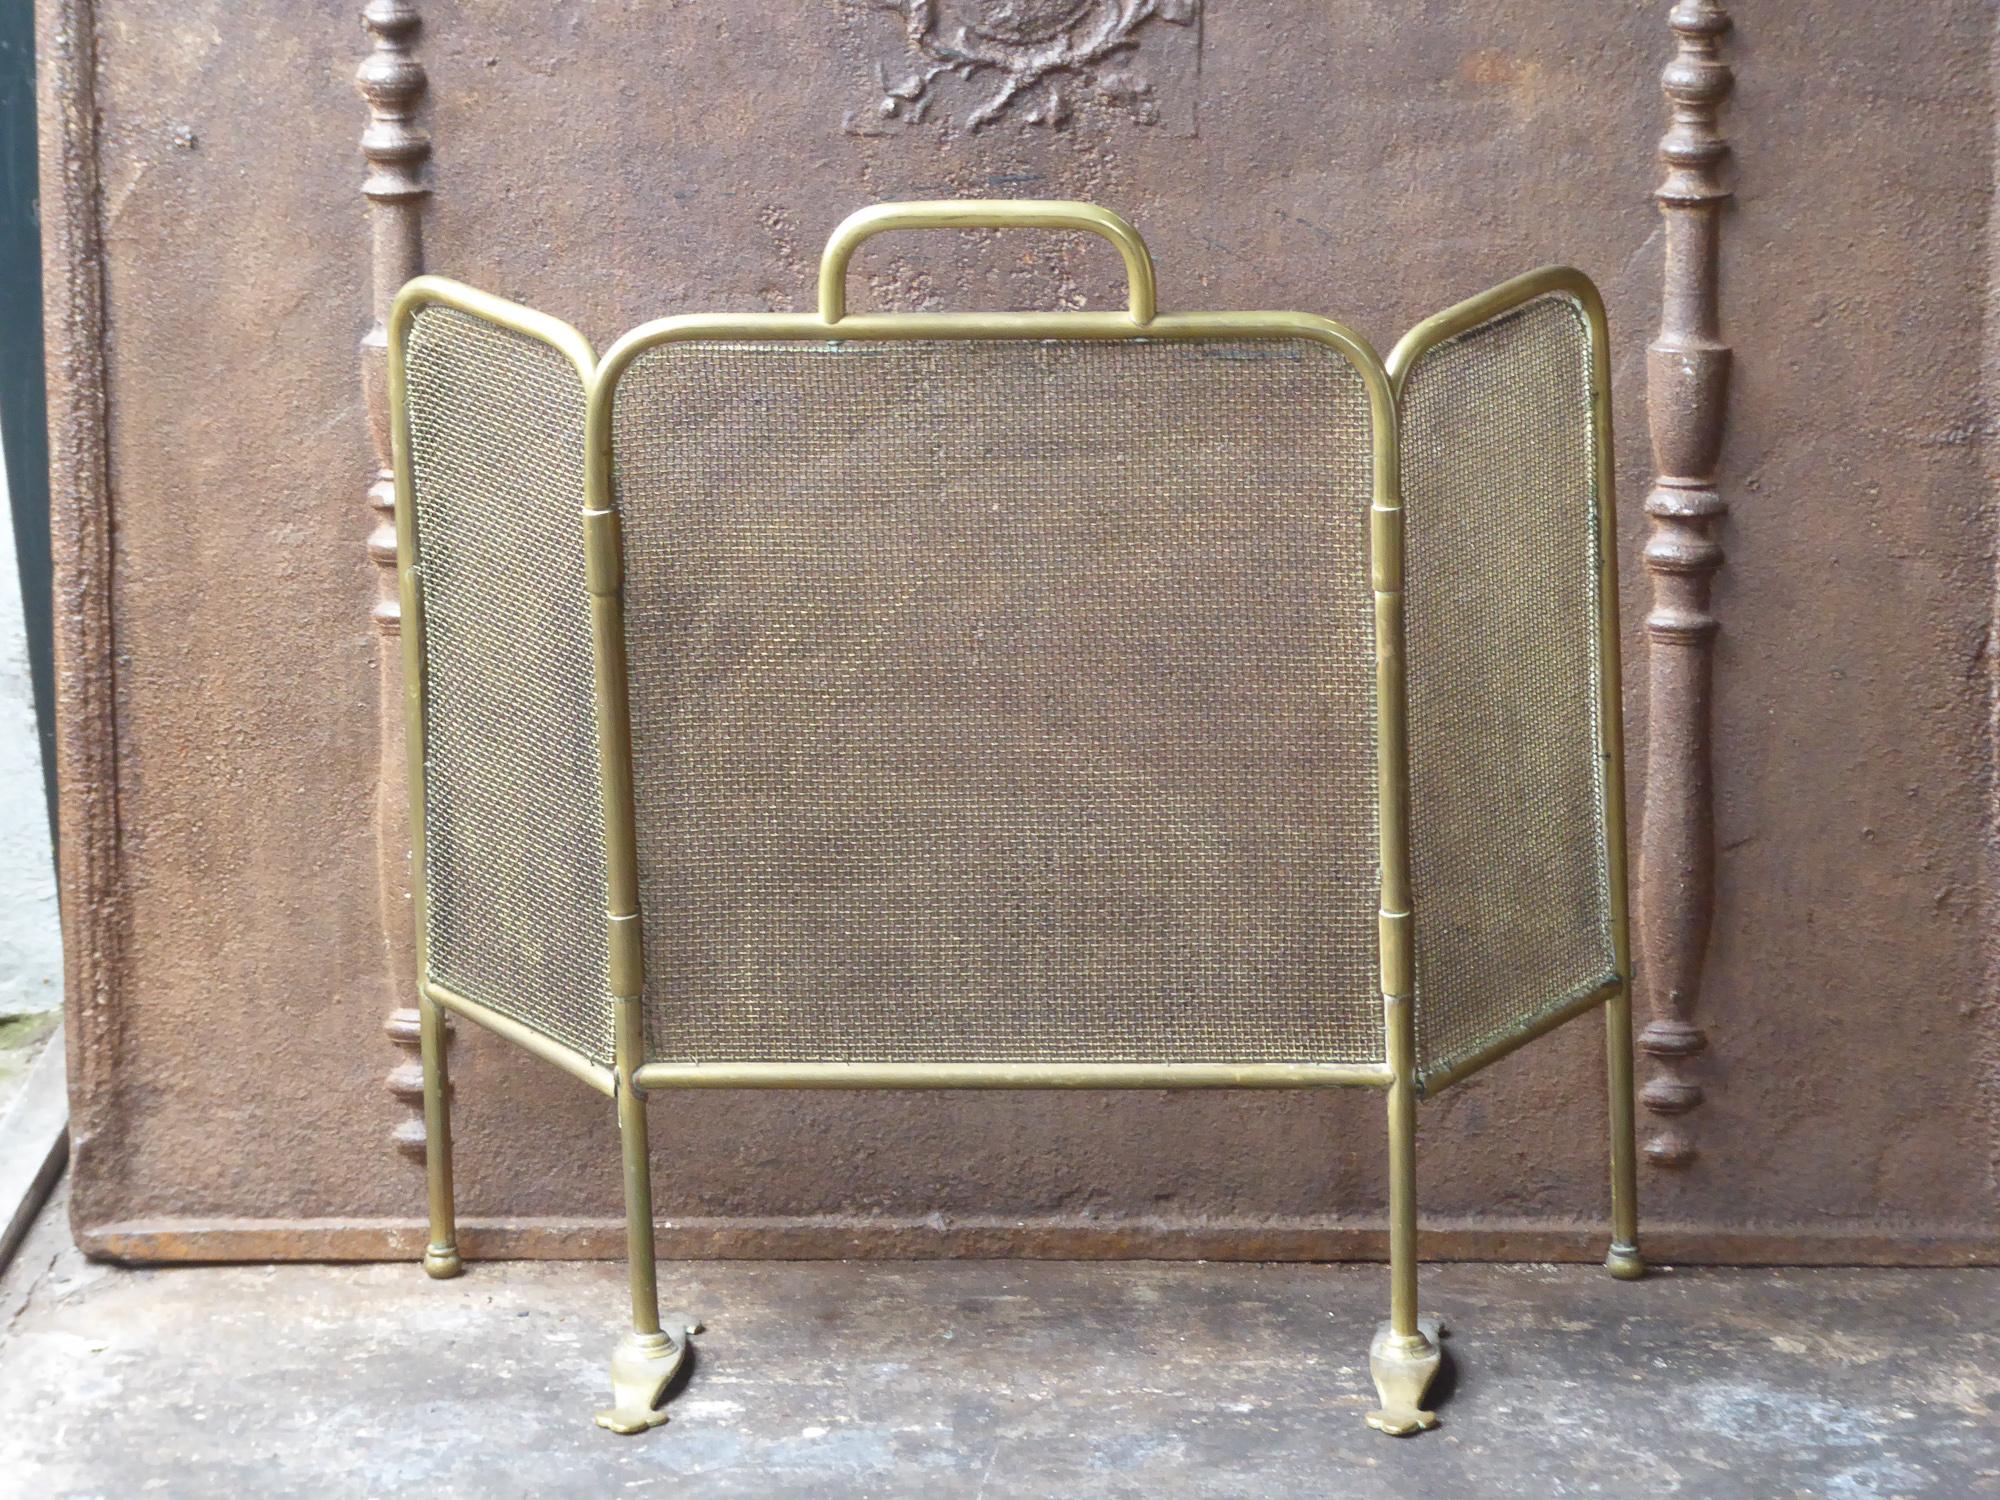 19th century English Victorian fireplace screen made of brass and iron mesh.







 